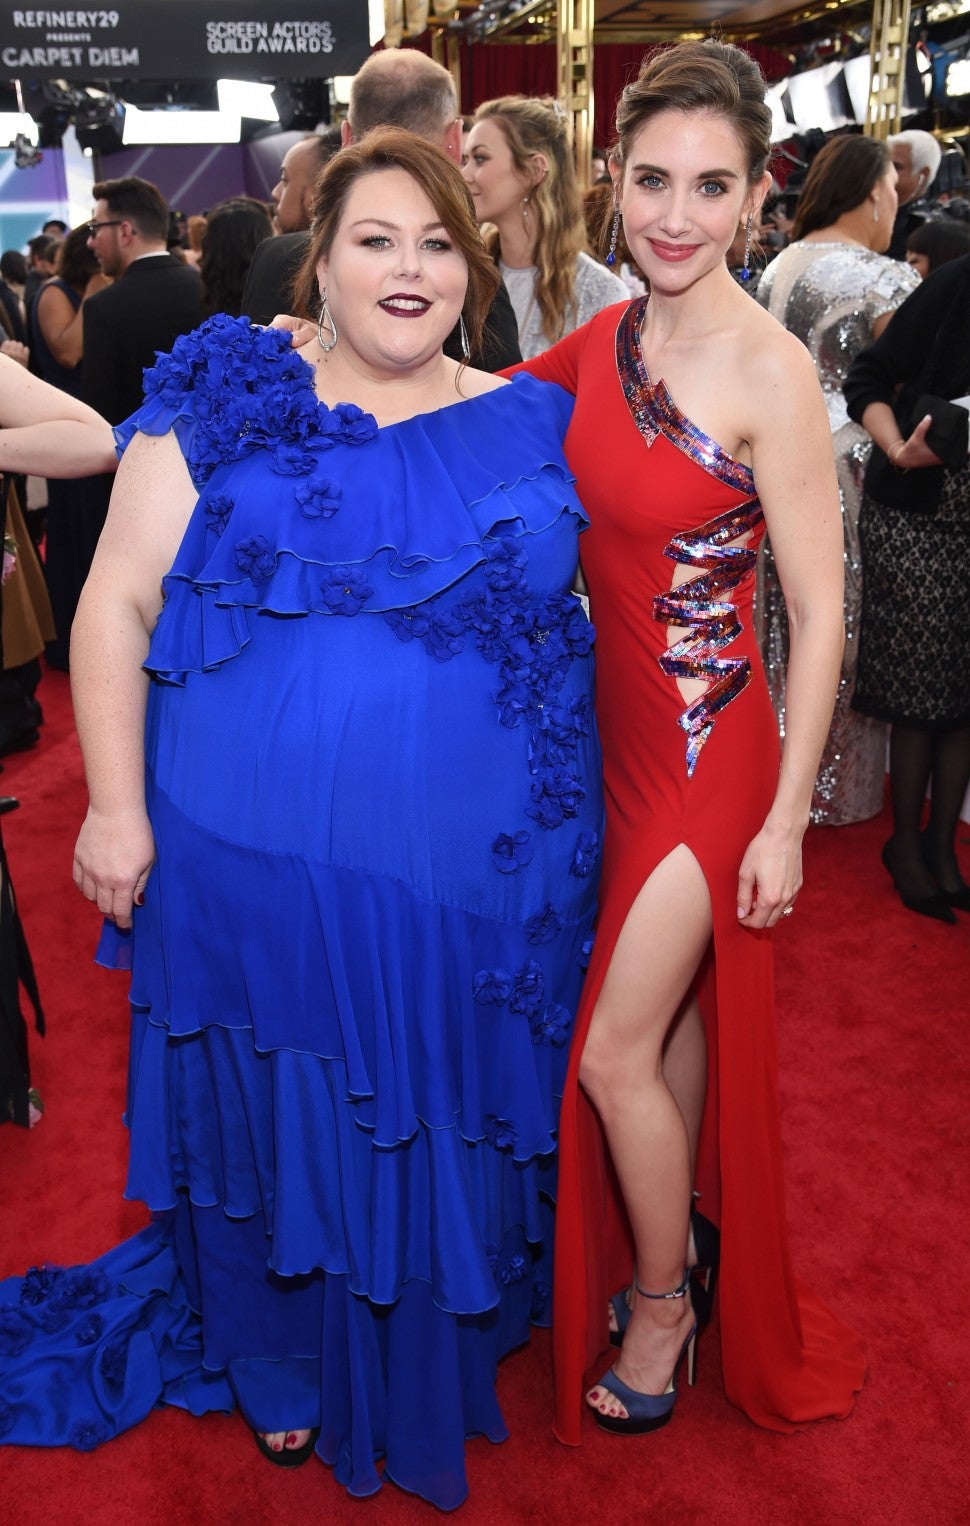 Chrissy Metz and Alison Brie attend the 24th Annual Screen Actors Guild Awards at The Shrine Auditorium on January 21, 2018 in Los Angeles, California.